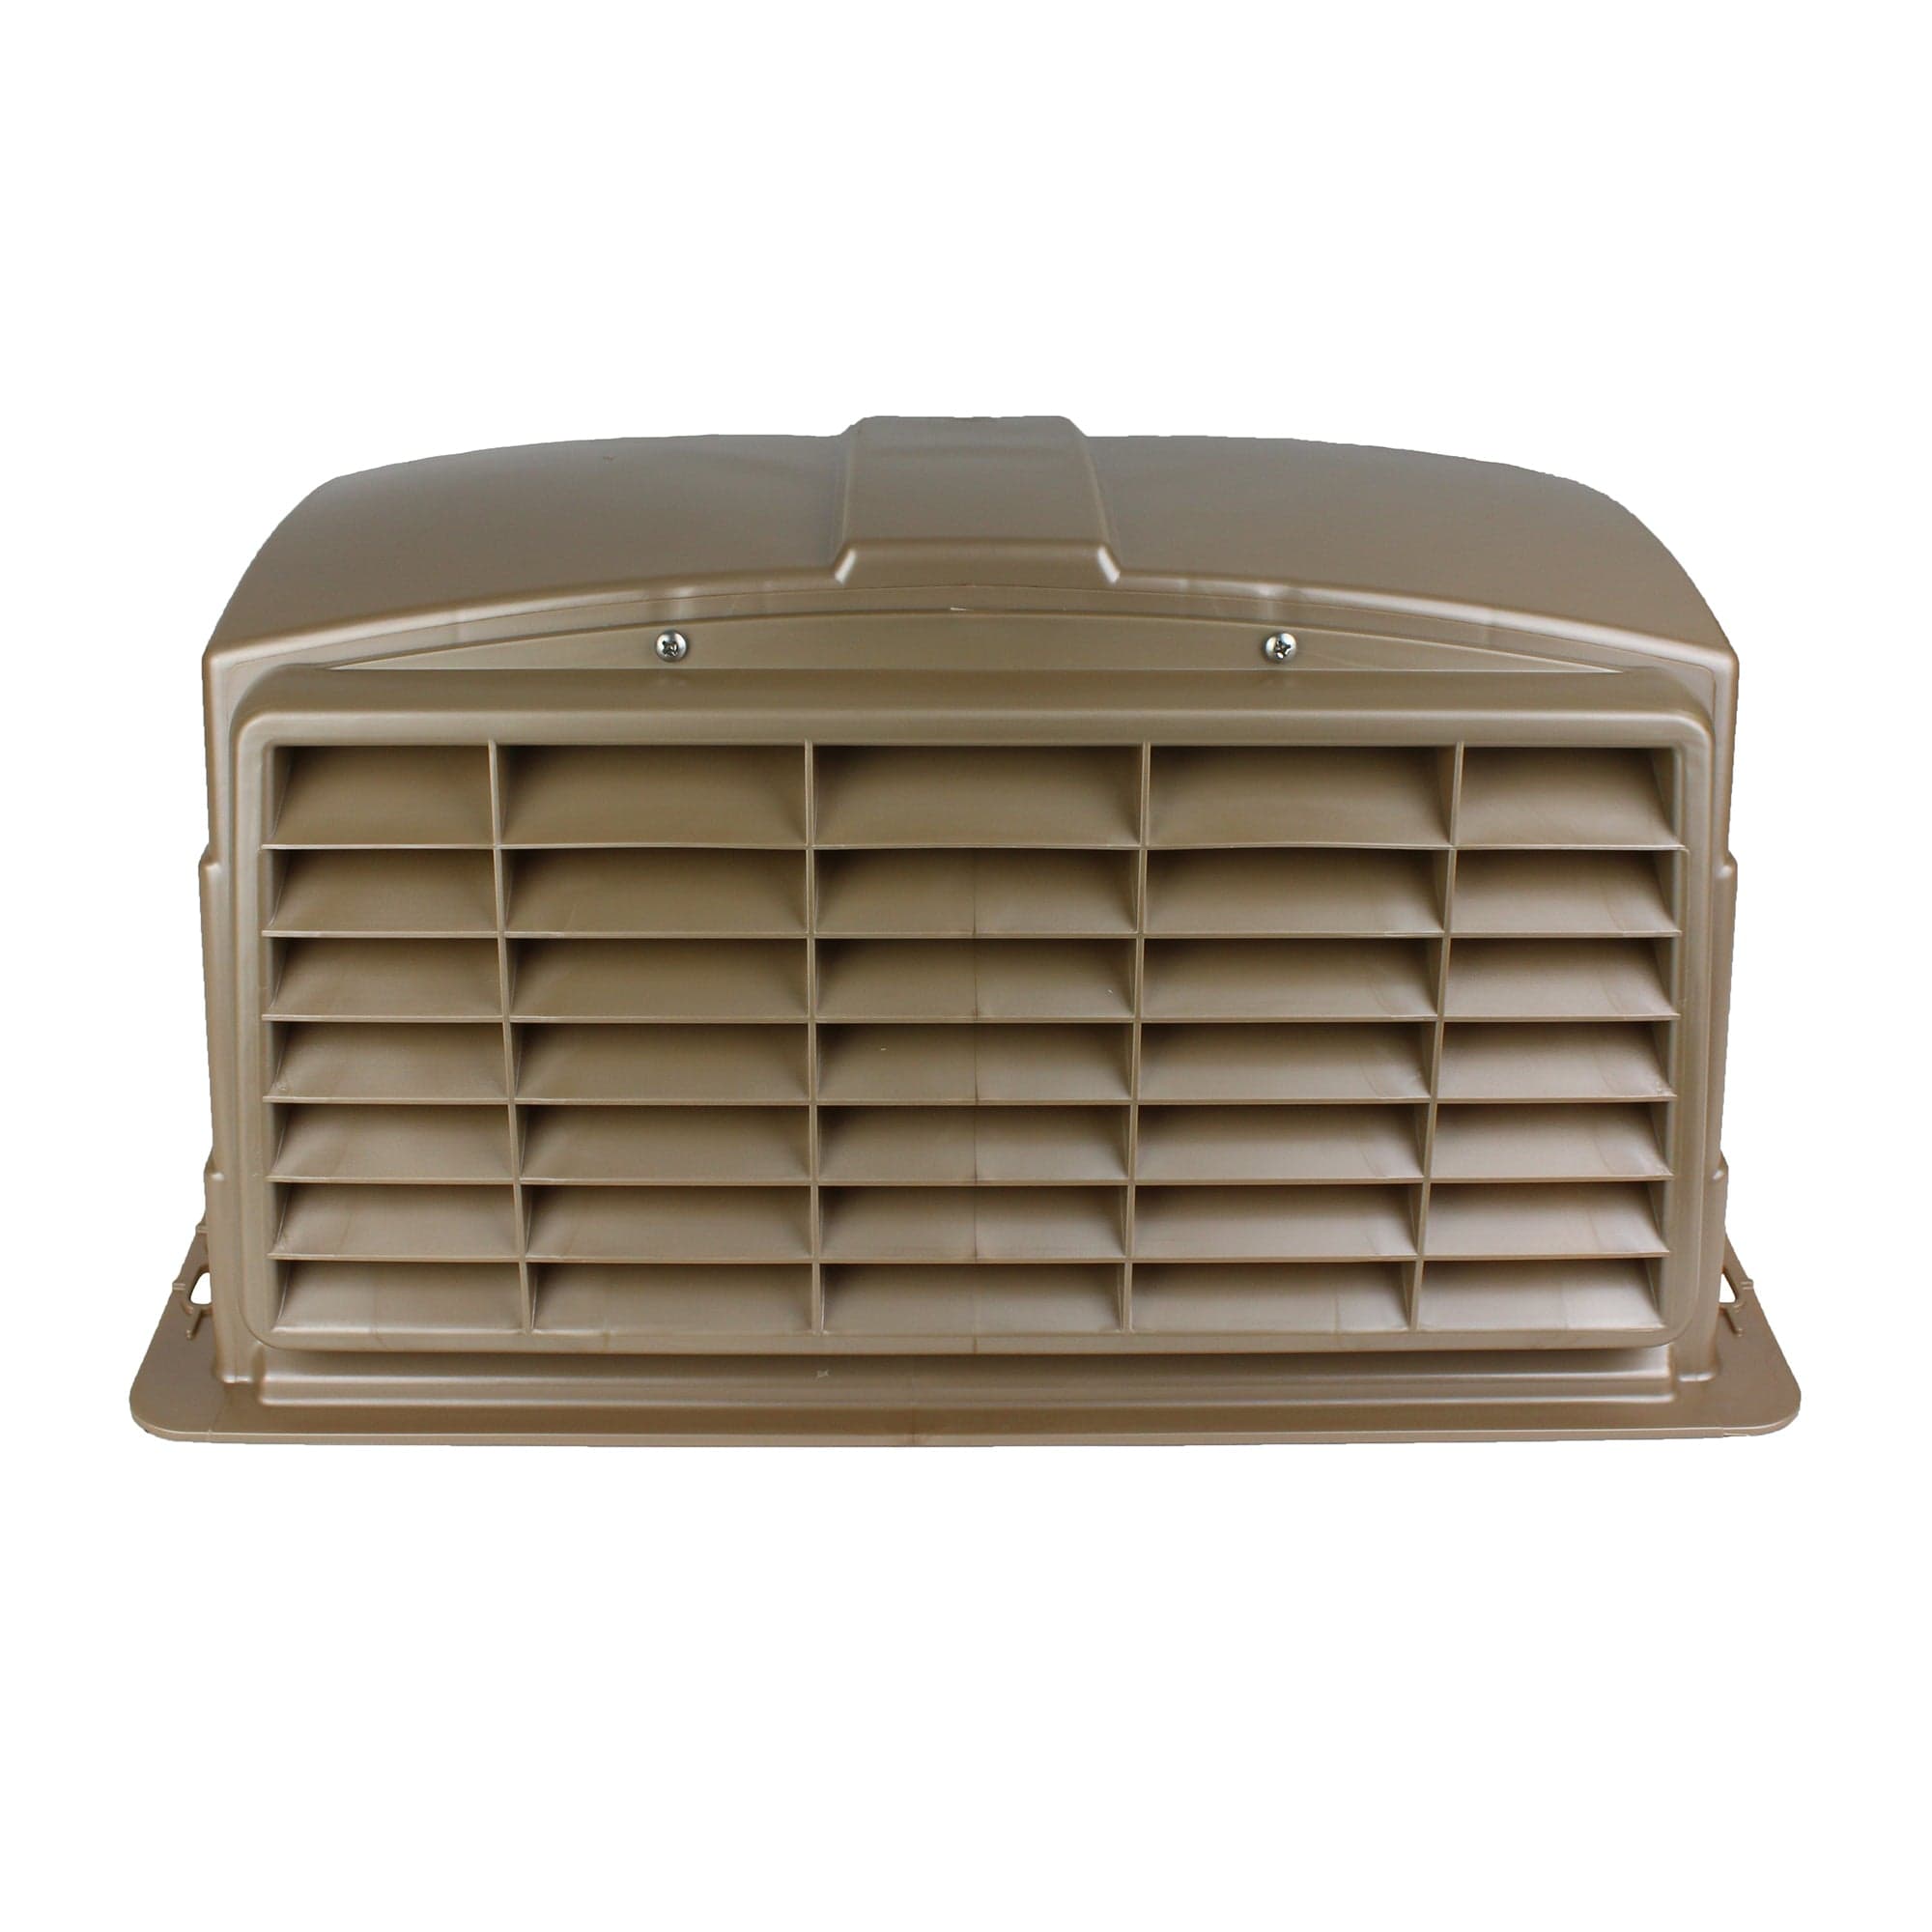 Camco 40463 RV Roof Vent Cover, Champagne